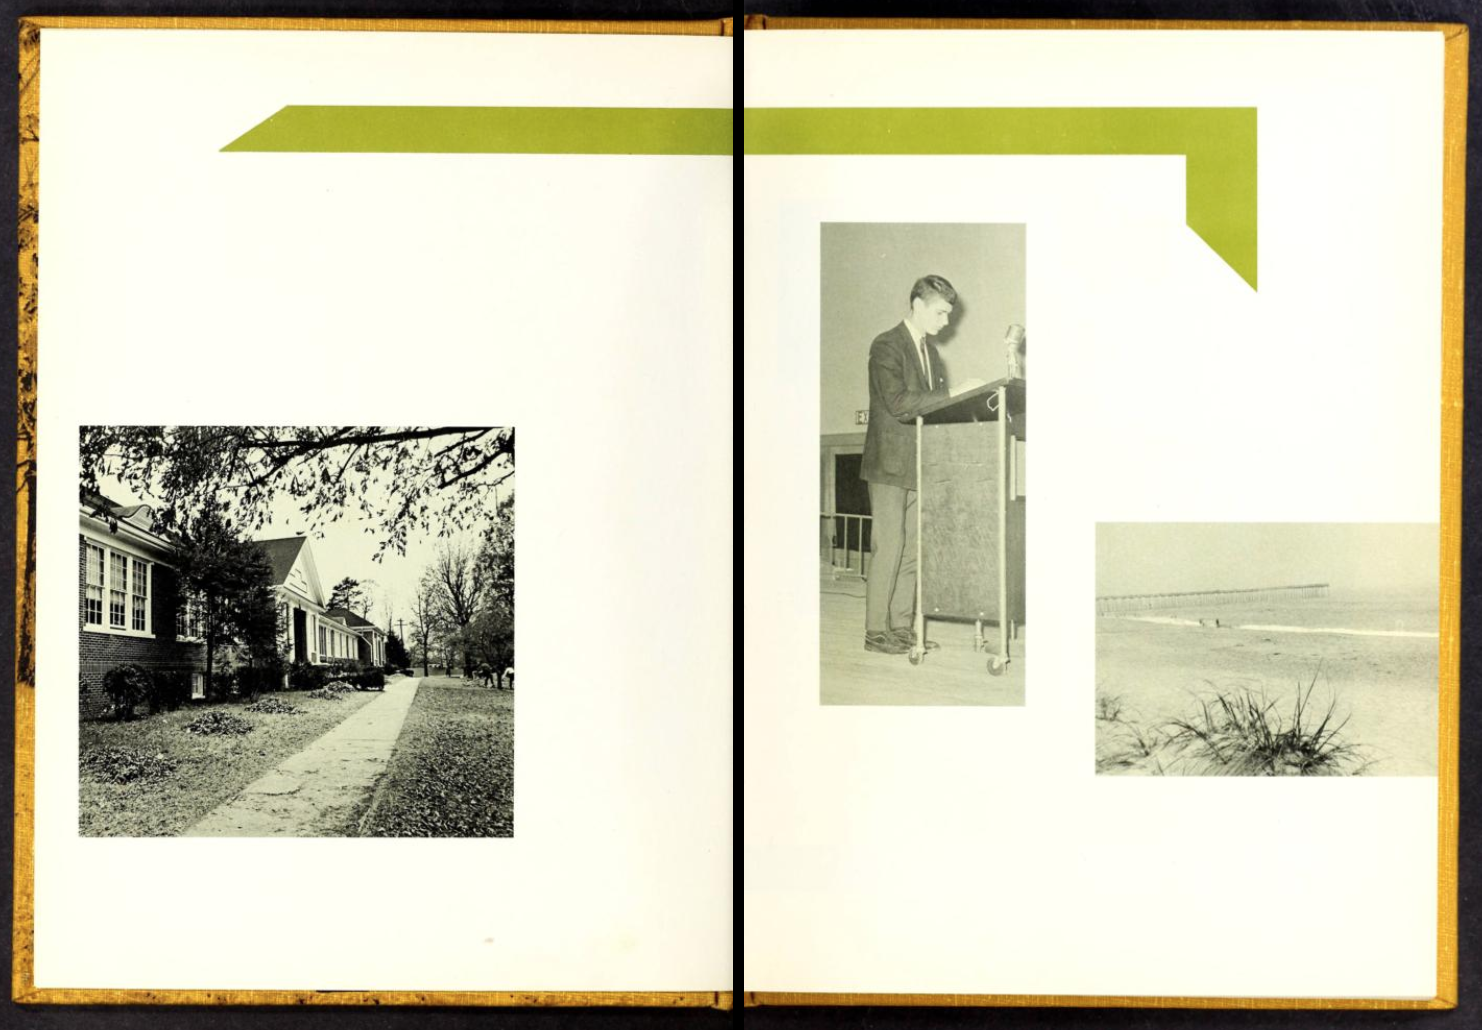 Two-page spread in the 1968 Granite Falls High School yearbook, The Granite Boulder. These pages show three photos artfully arranged around the two pages of life in Granite Falls.